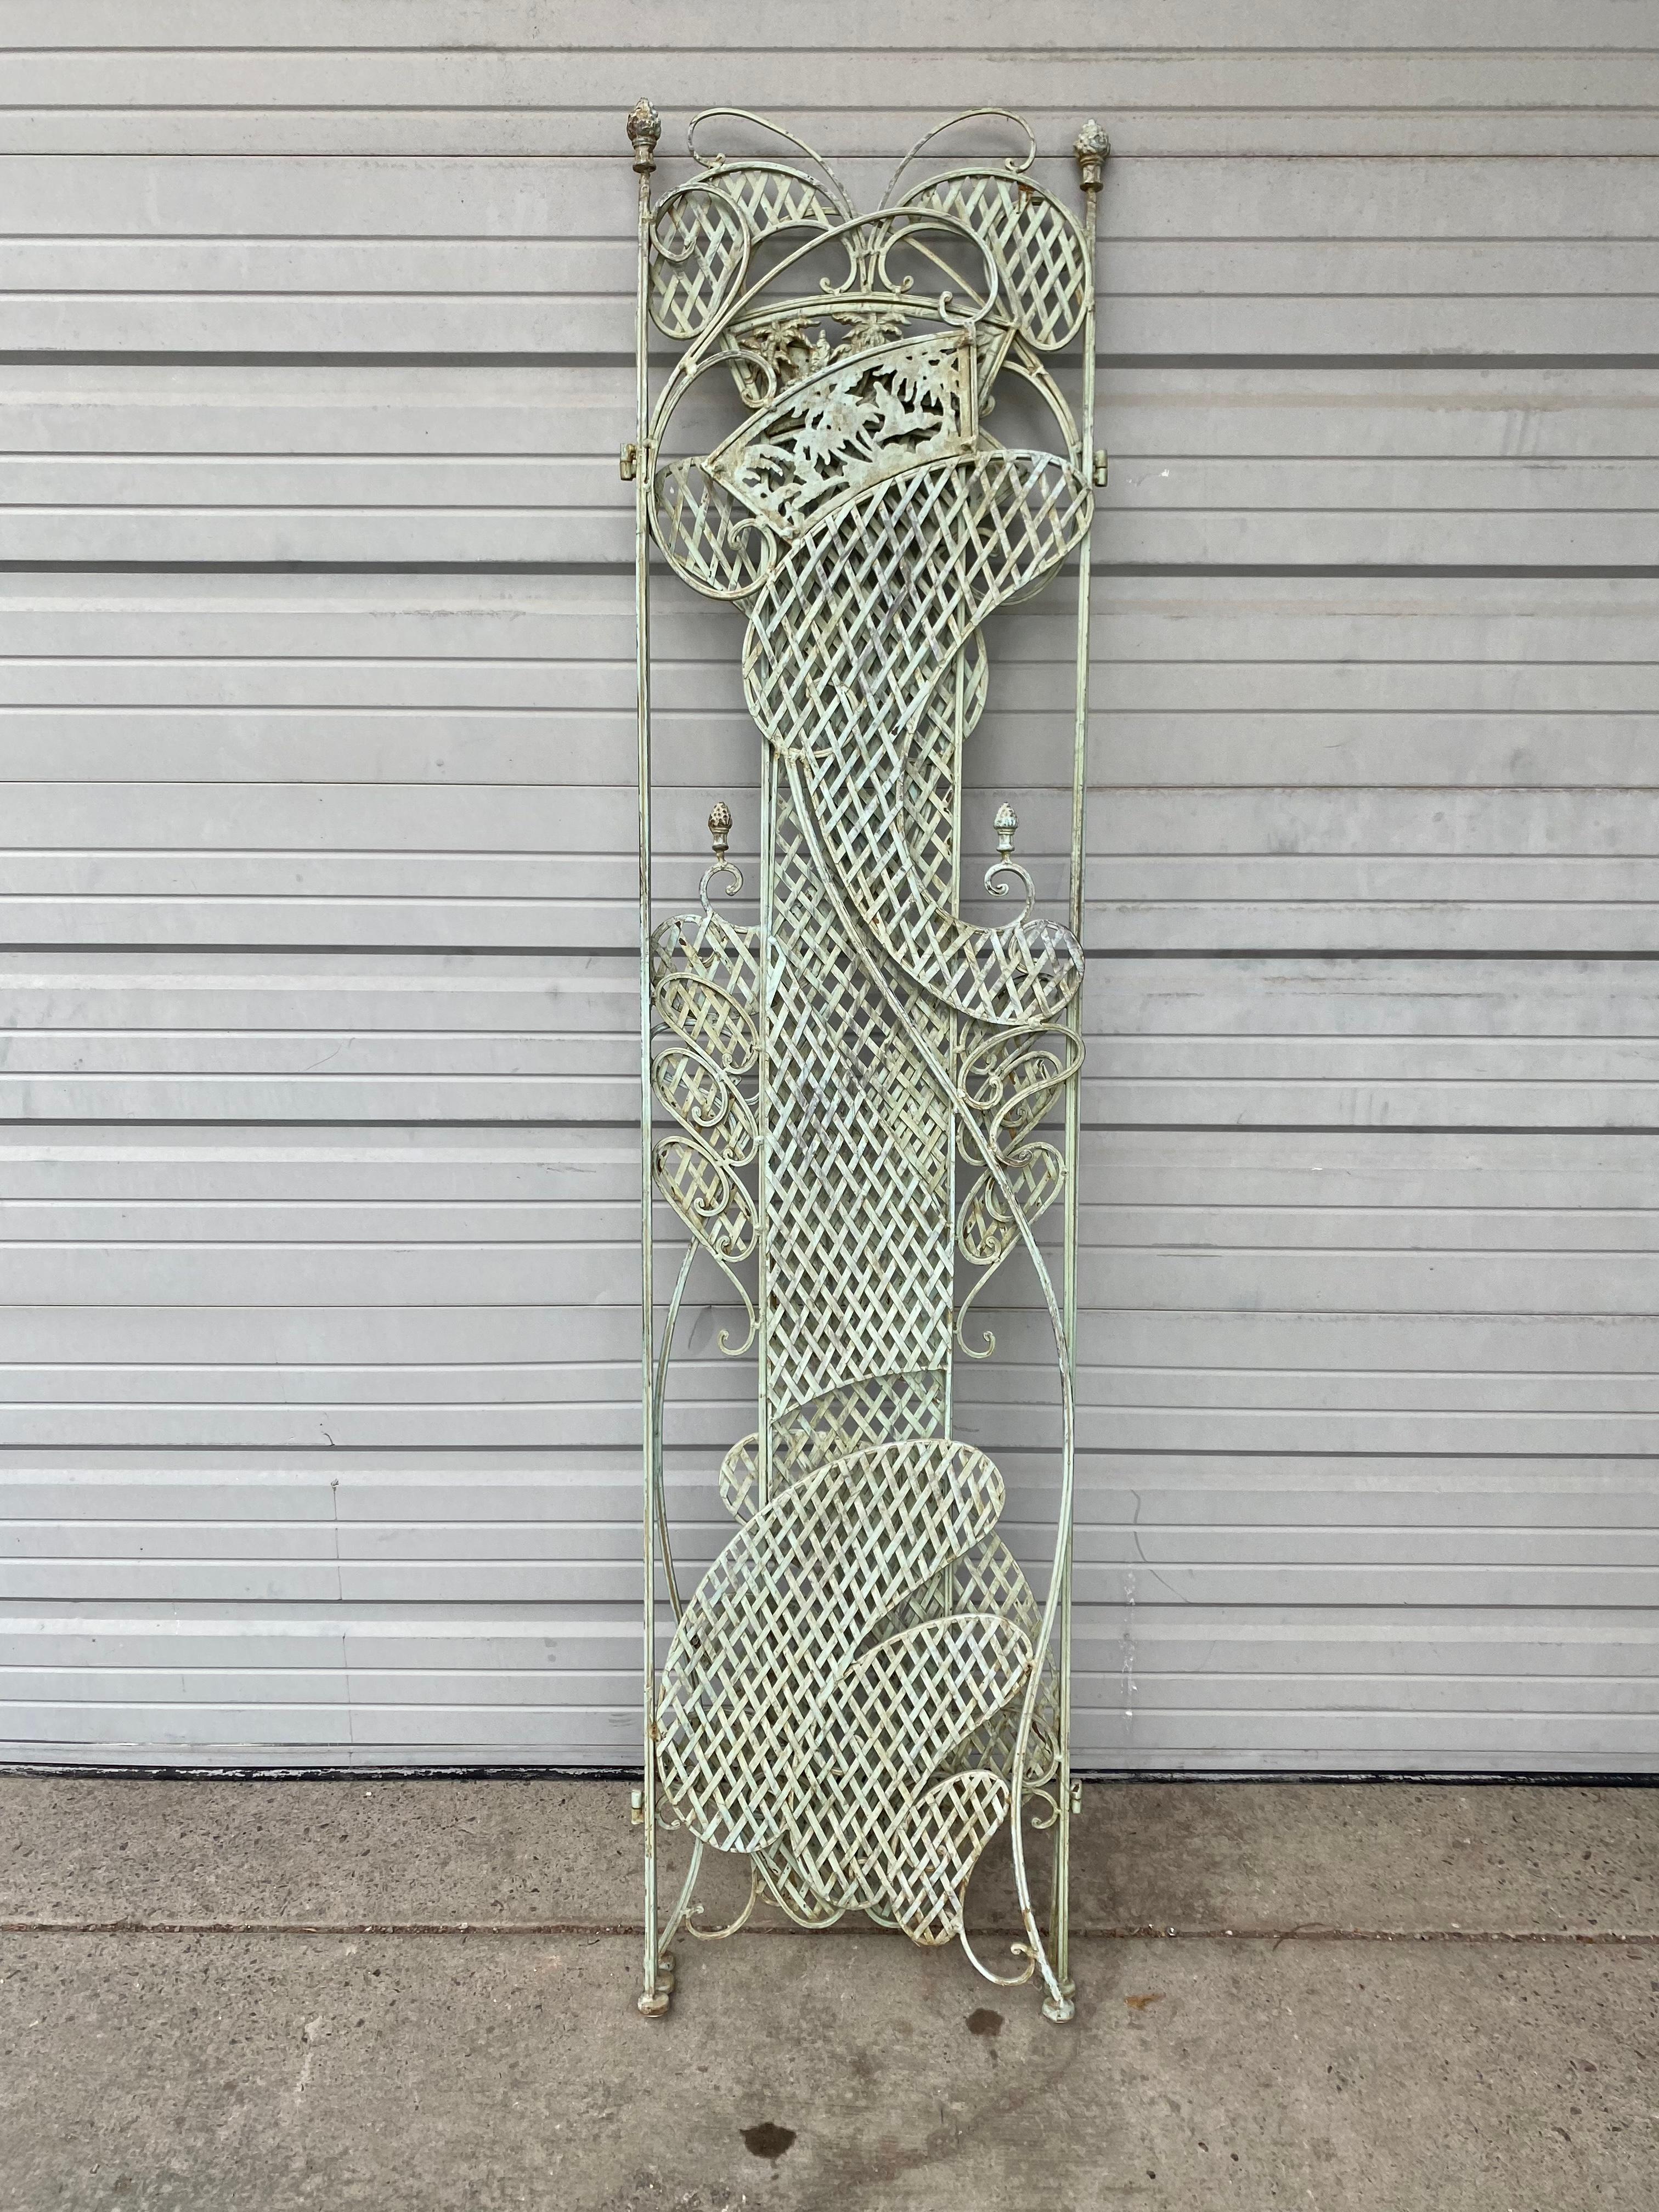 Mid-20th Century Unusual Art Nouveau Style 3 Panel Decorative Wrought Iron Screen/Divider For Sale